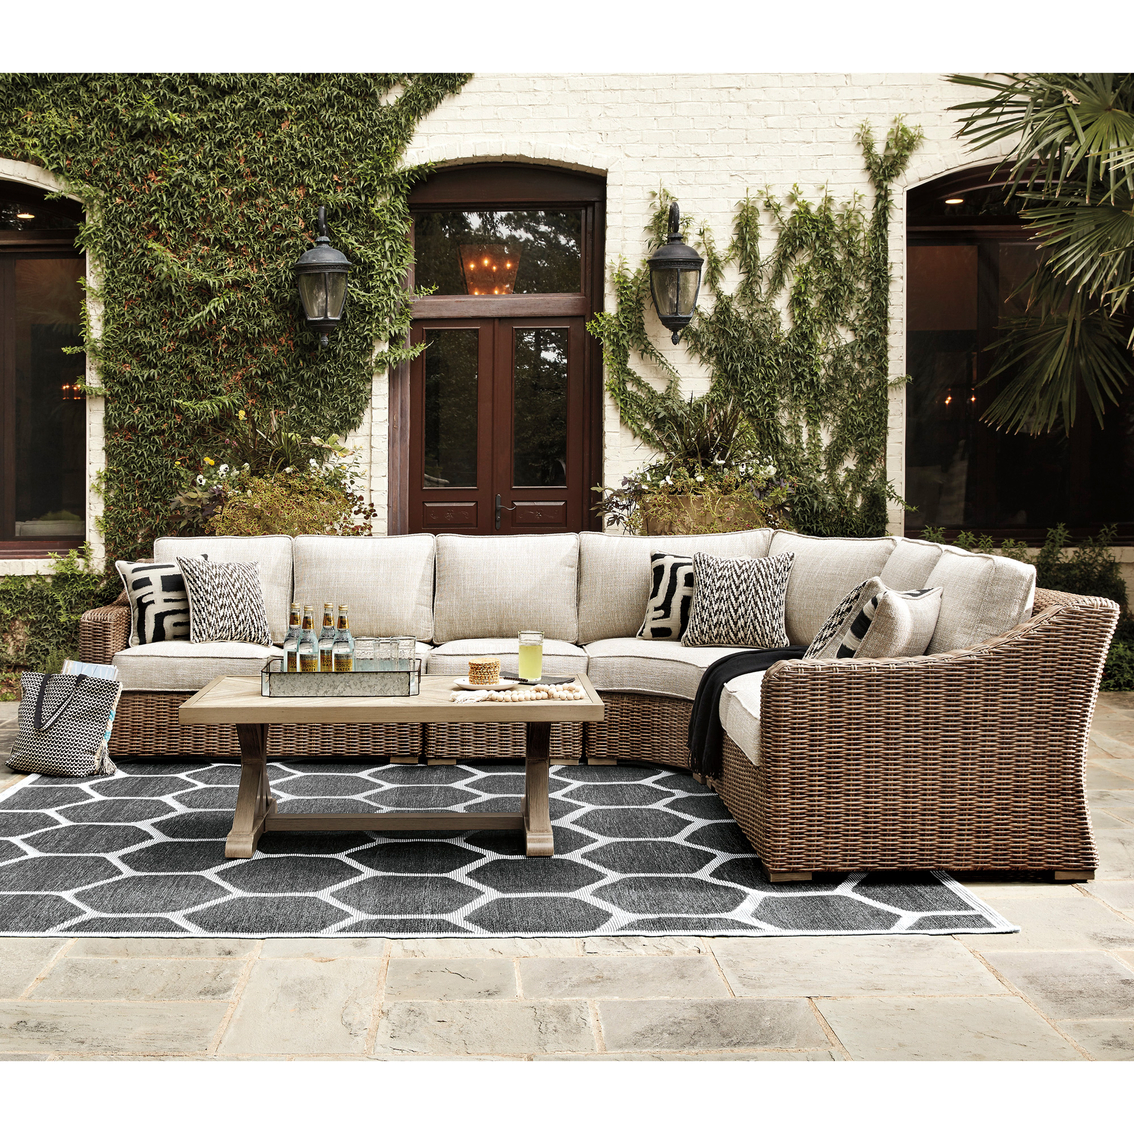 Signature Design by Ashley Beachcroft 4 pc. Sectional with Coffee and End Table - Image 7 of 9